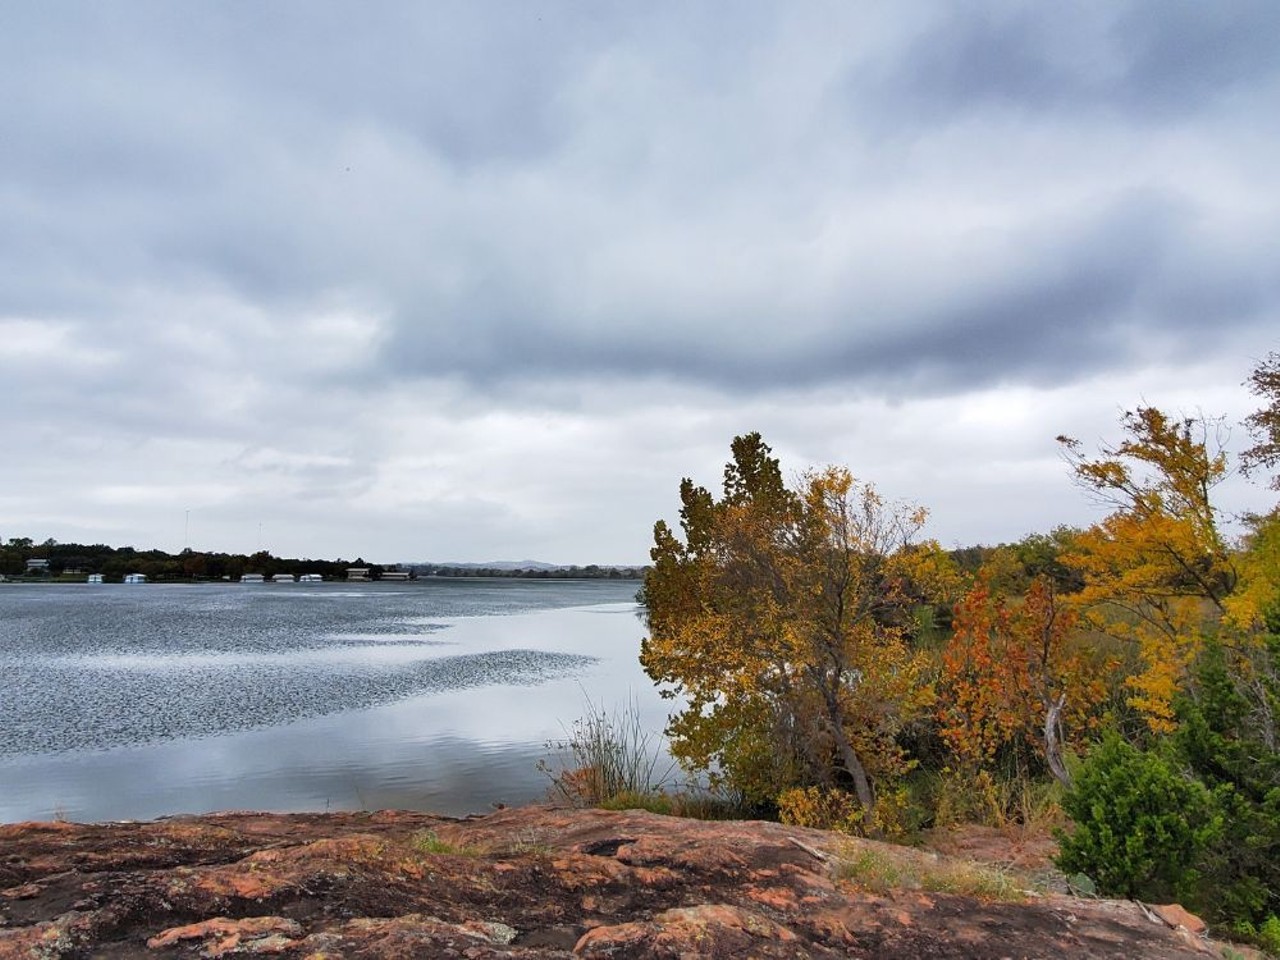 Inks Lake State Park
3630 Park Road 4 W, Burnet, (512) 793-2223, tpwd.texas.gov
If you’re looking for hills, Inks Lake is worth the visit. With a variety of trees and plants — cedar, live oak, prickly pear cacti and yucca — the landscape here is absolutely gorgeous. North of Austin, Inks Lake is a prime spot to appreciate nature, which you can do while camping, backpacking, picnicking and hiking. Just make it a point to swing by the Devil’s Waterhole.